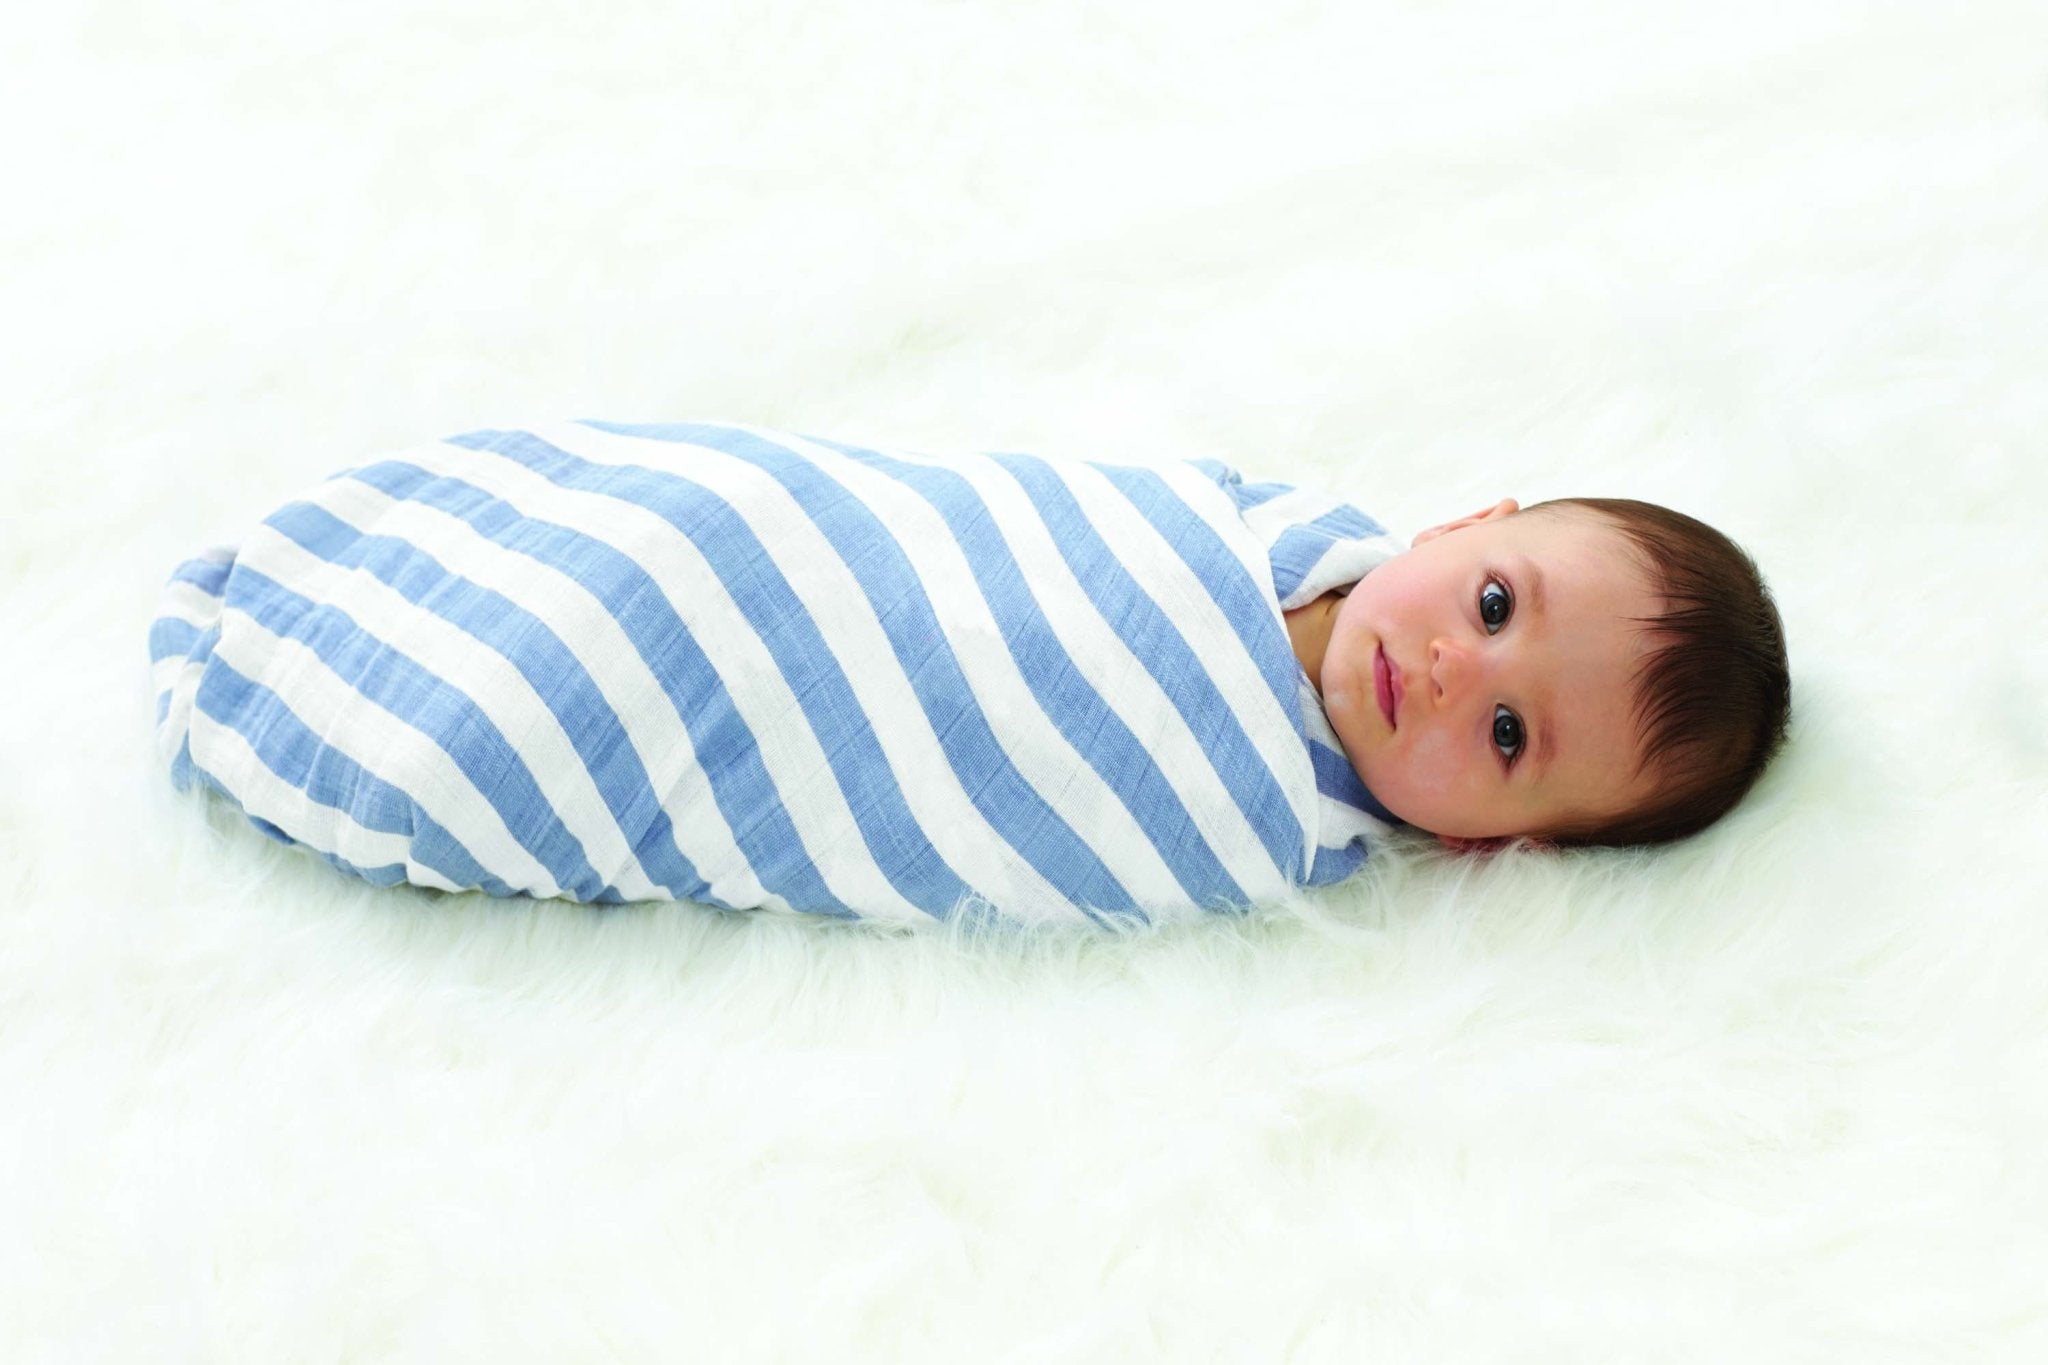 Aden & Anais Infant Boutique Classic Swaddle Blankets, Rock Star, 4-pack - ANB Baby -$50 - $75